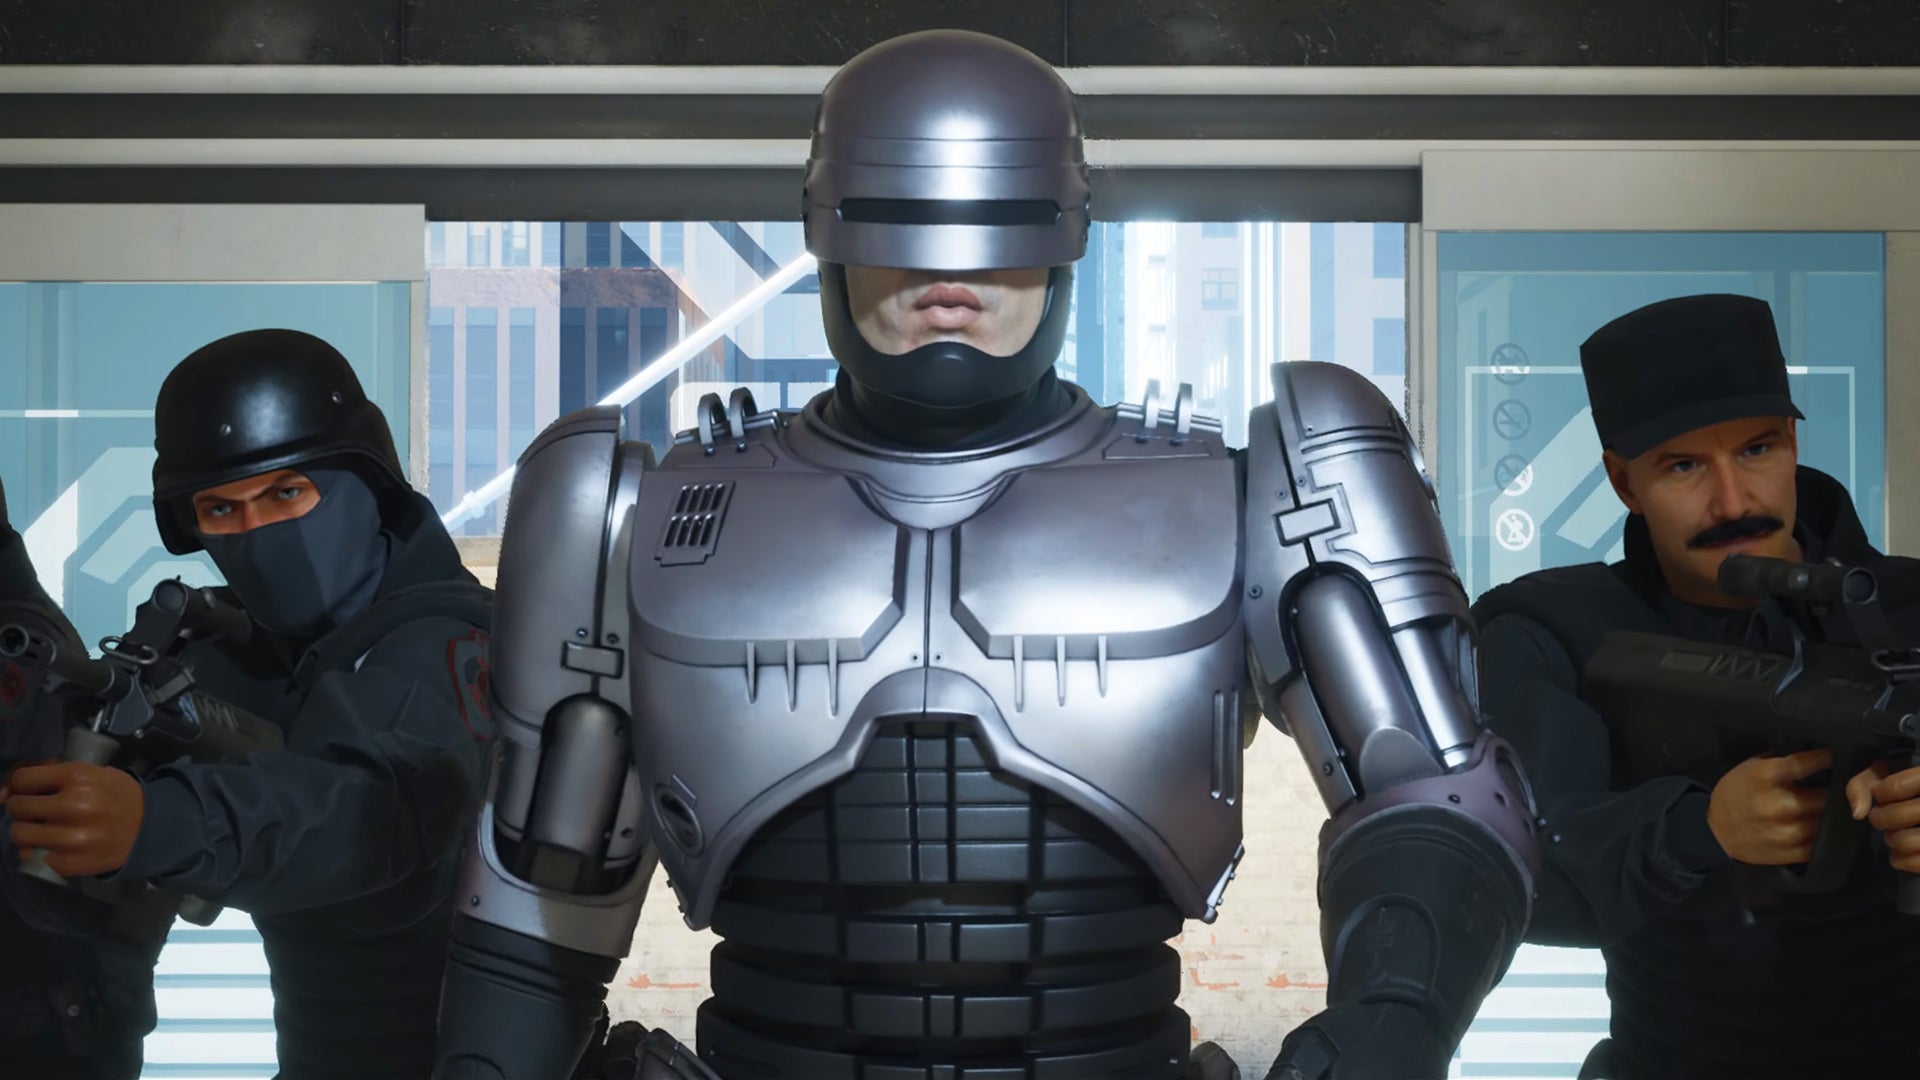 35 Years Ago: Dead or Alive, You're Coming With RoboCop